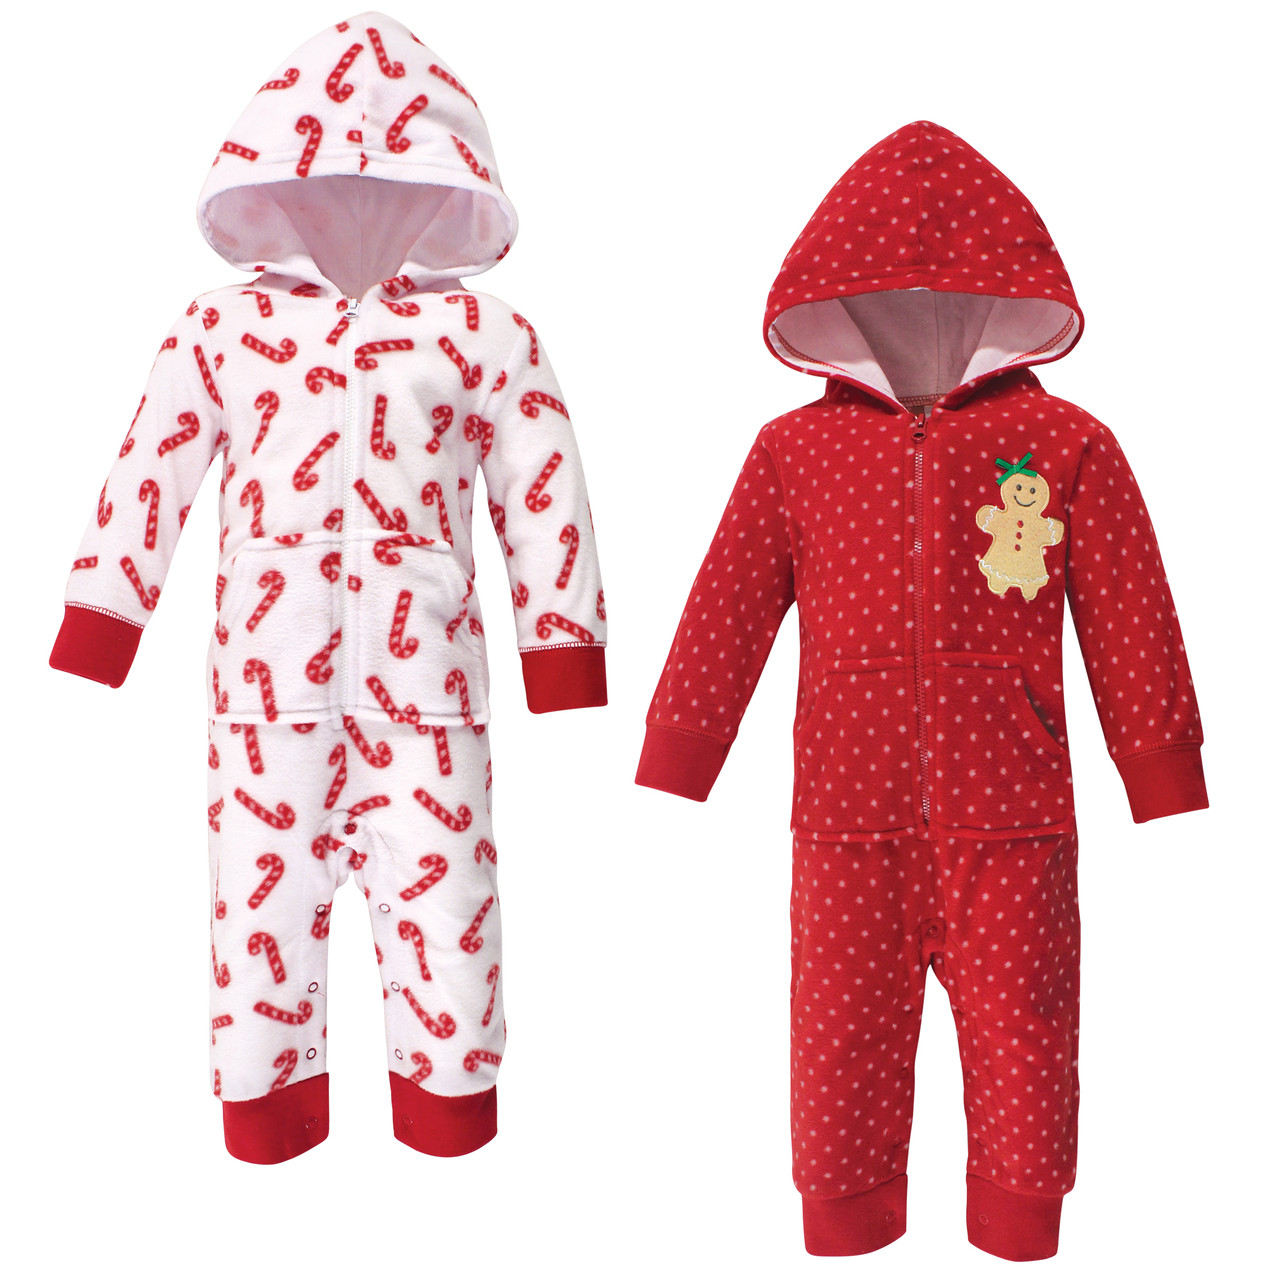 Hudson Baby Fleece Coveralls and Union Suits, Sugar and Spice 2-Pack ...